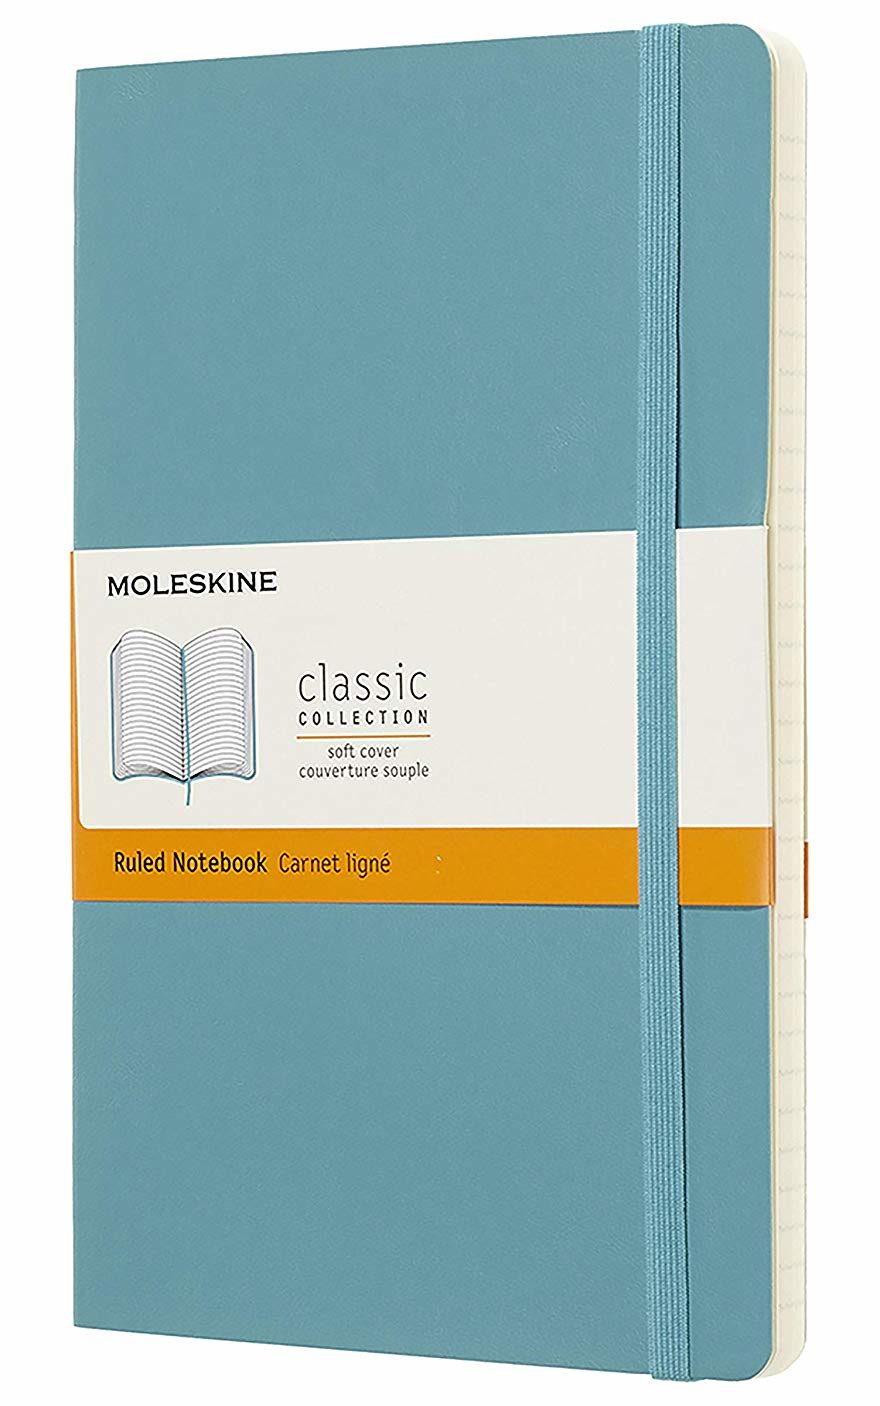 Gifts For Coworker 2022: Moleskin Notebook 2022